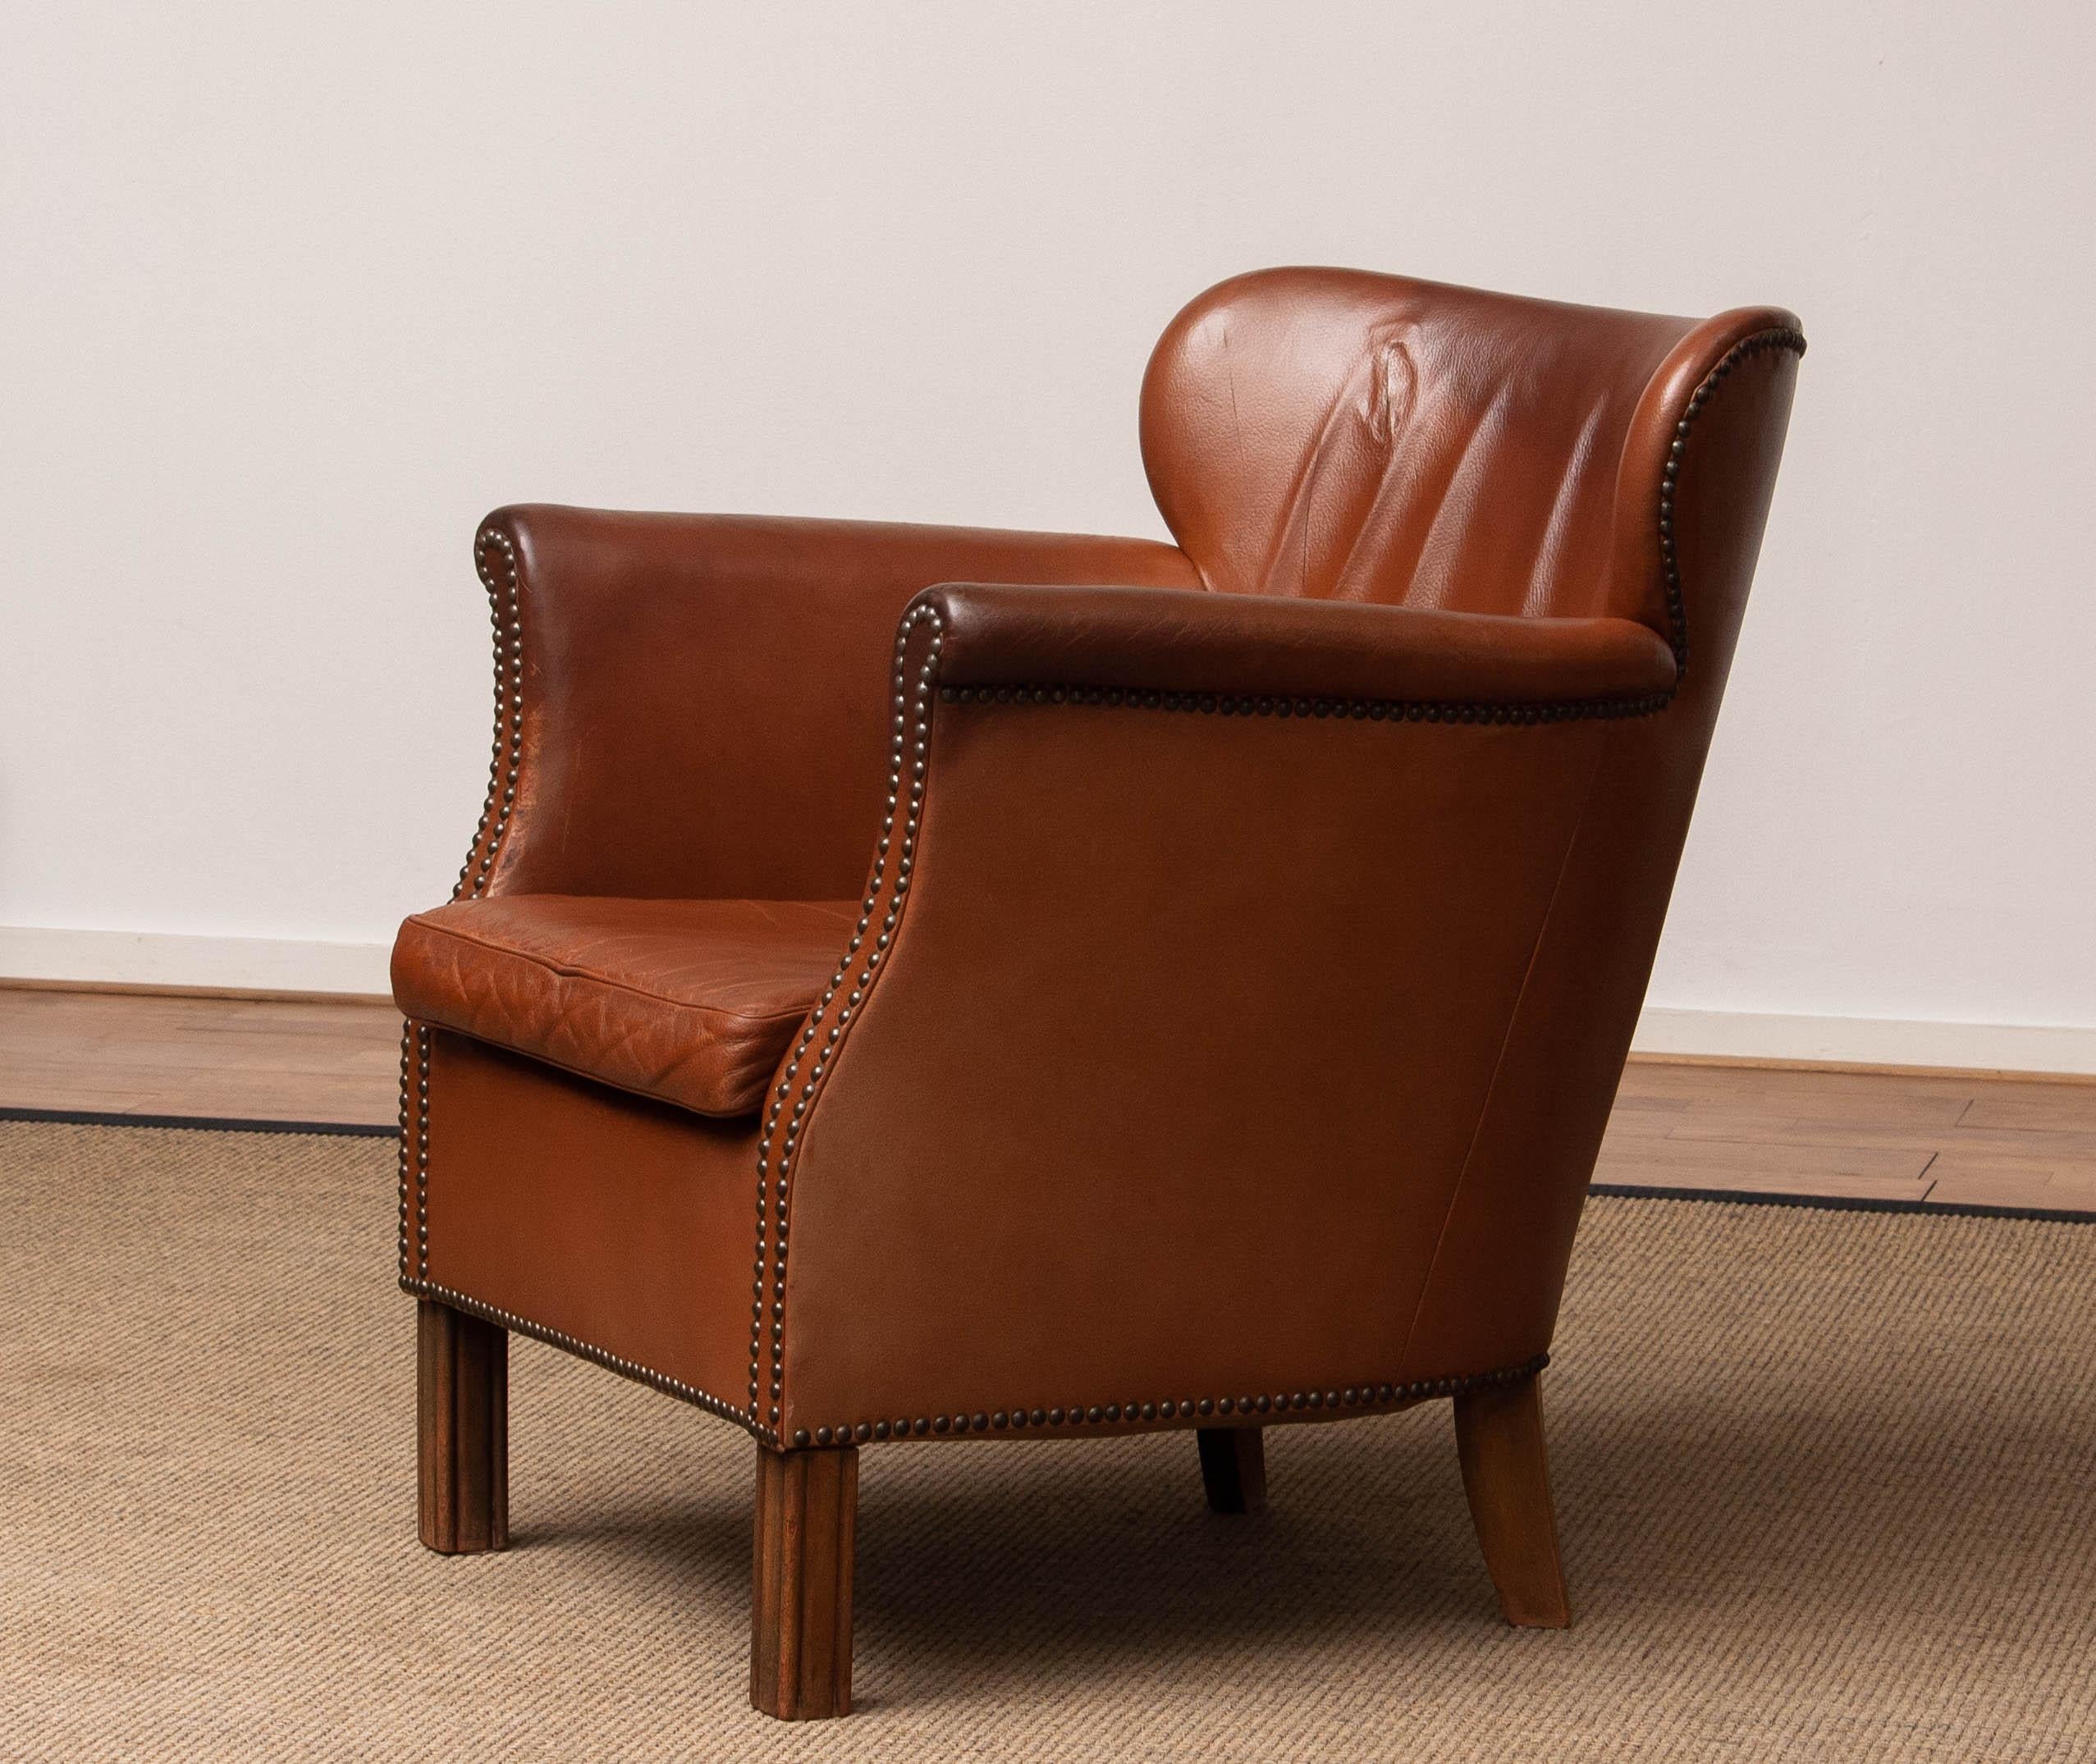 Mid-20th Century 1940's Scandinavian Tan / Brown Nailed Leather Club / Cigar Chair from Denmark